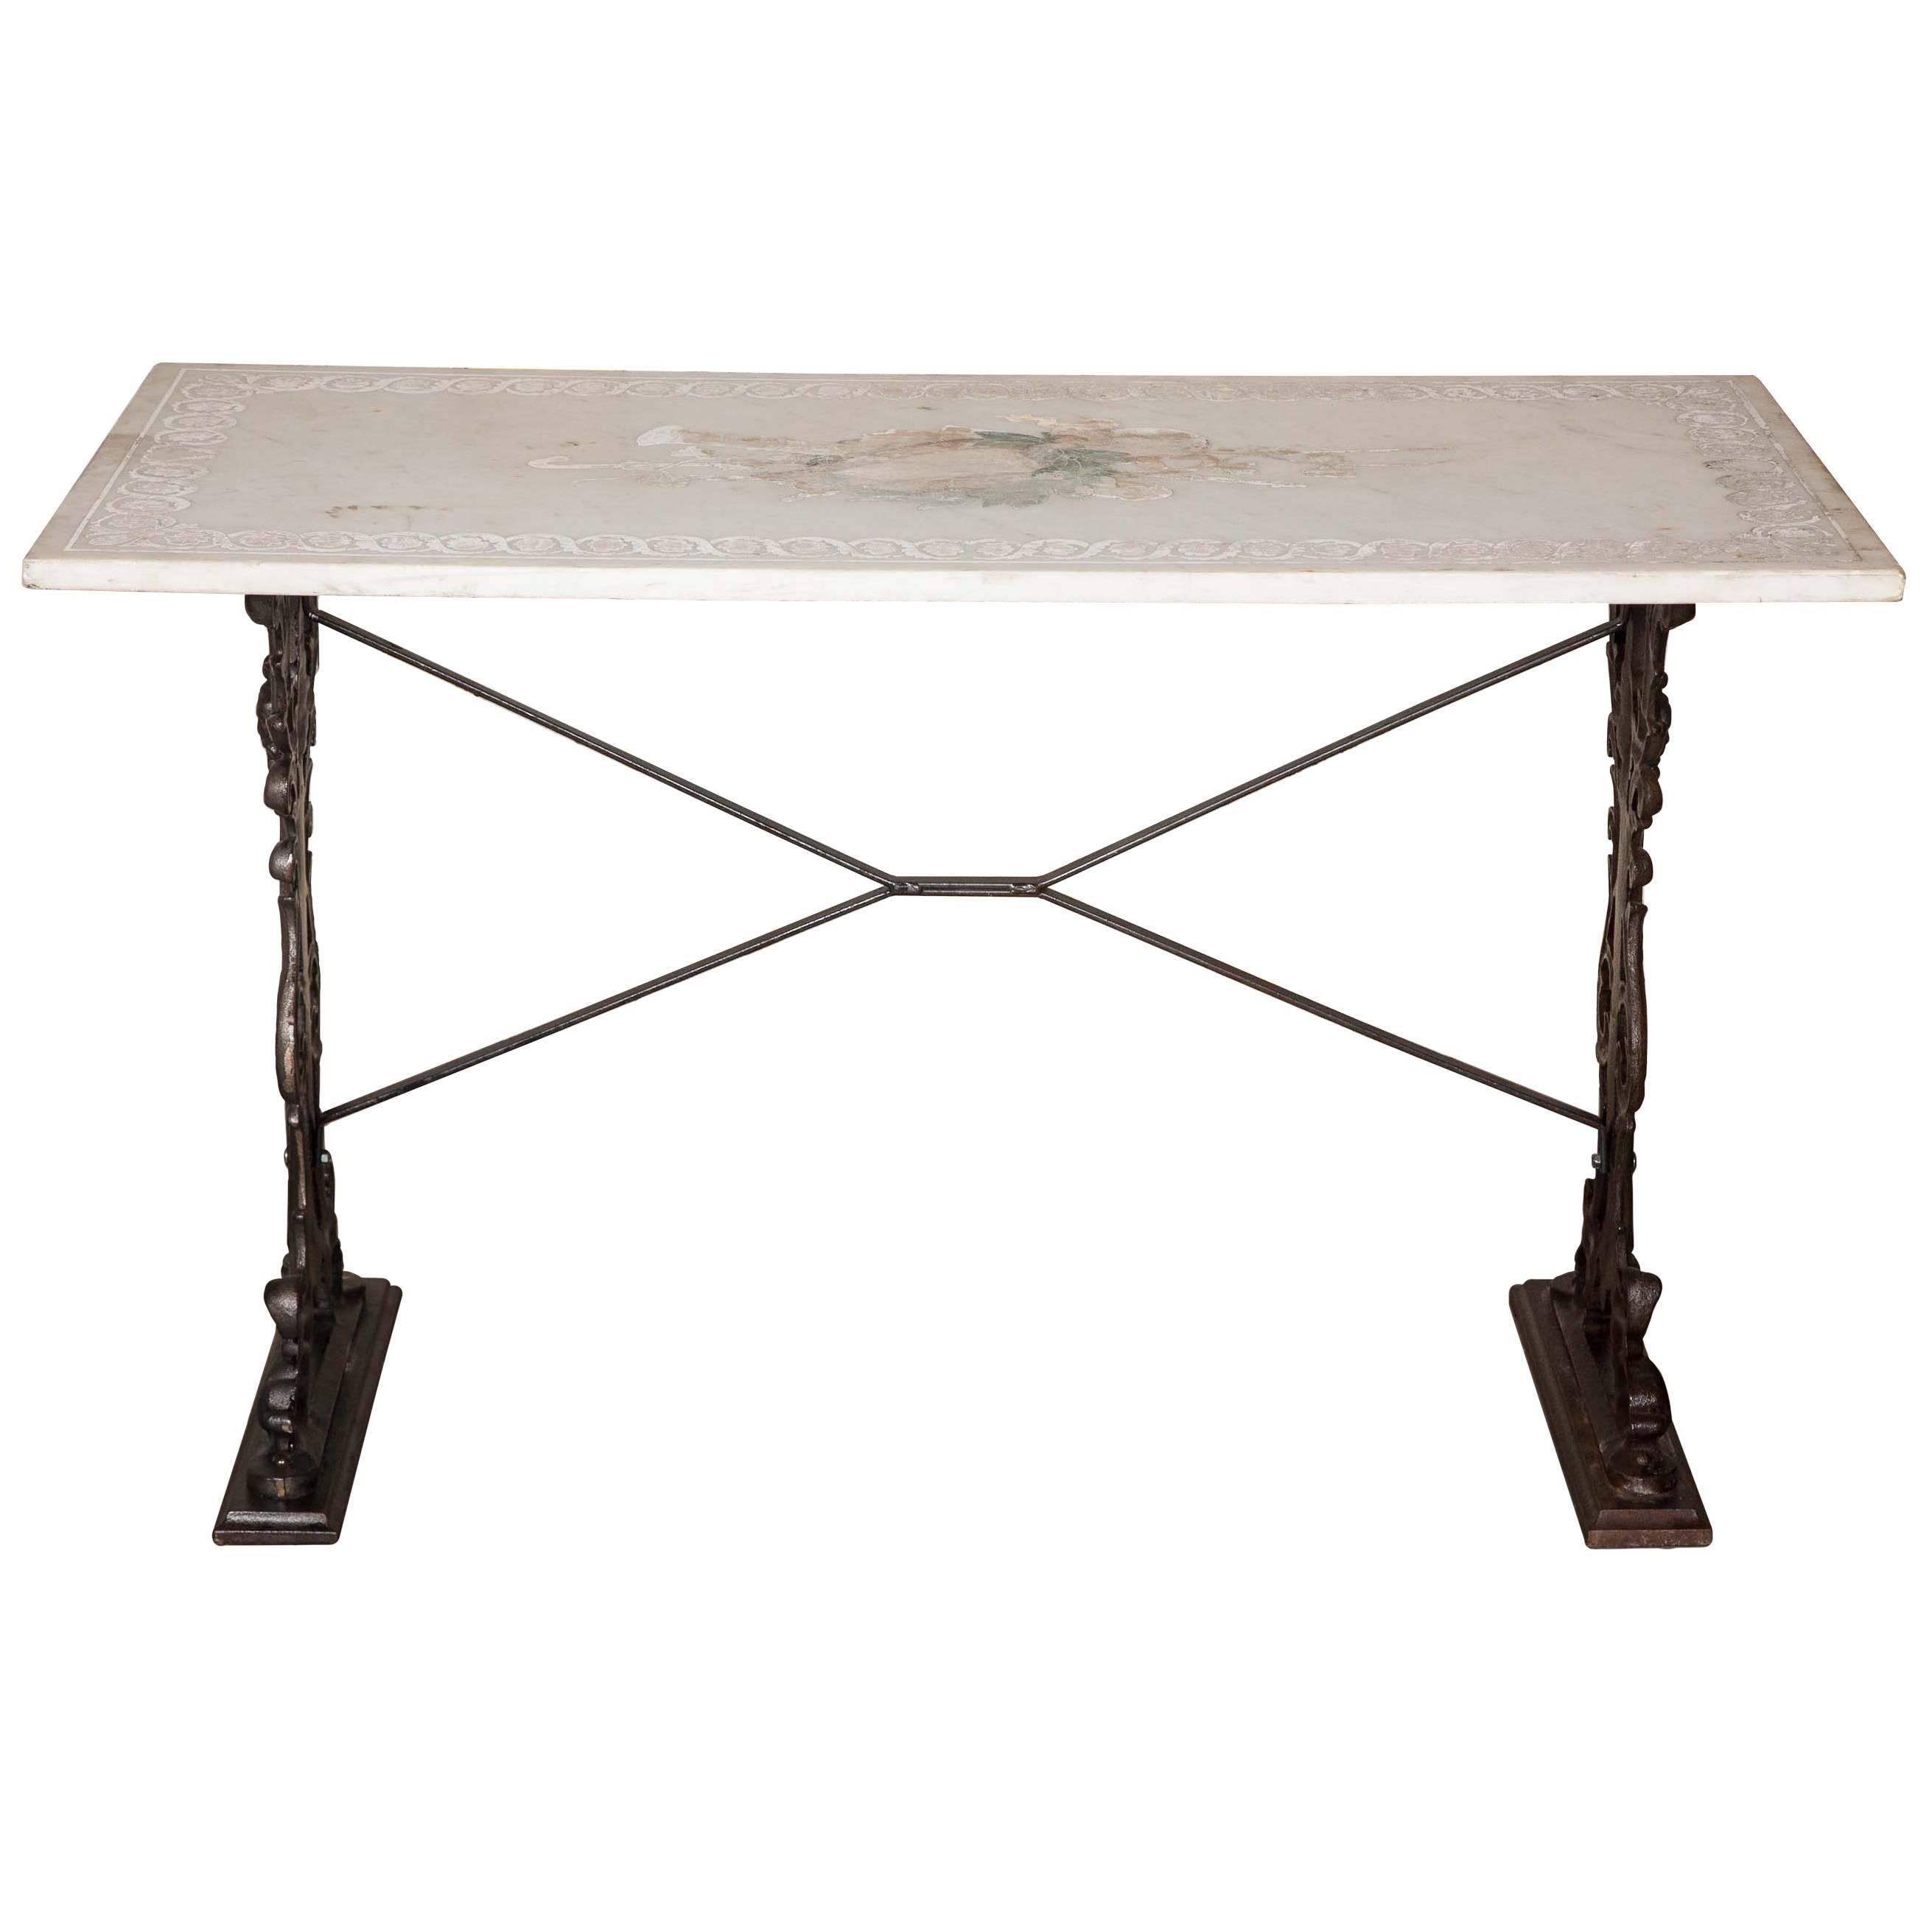 Victorian Inlaid Marble Table on Iron Base For Sale